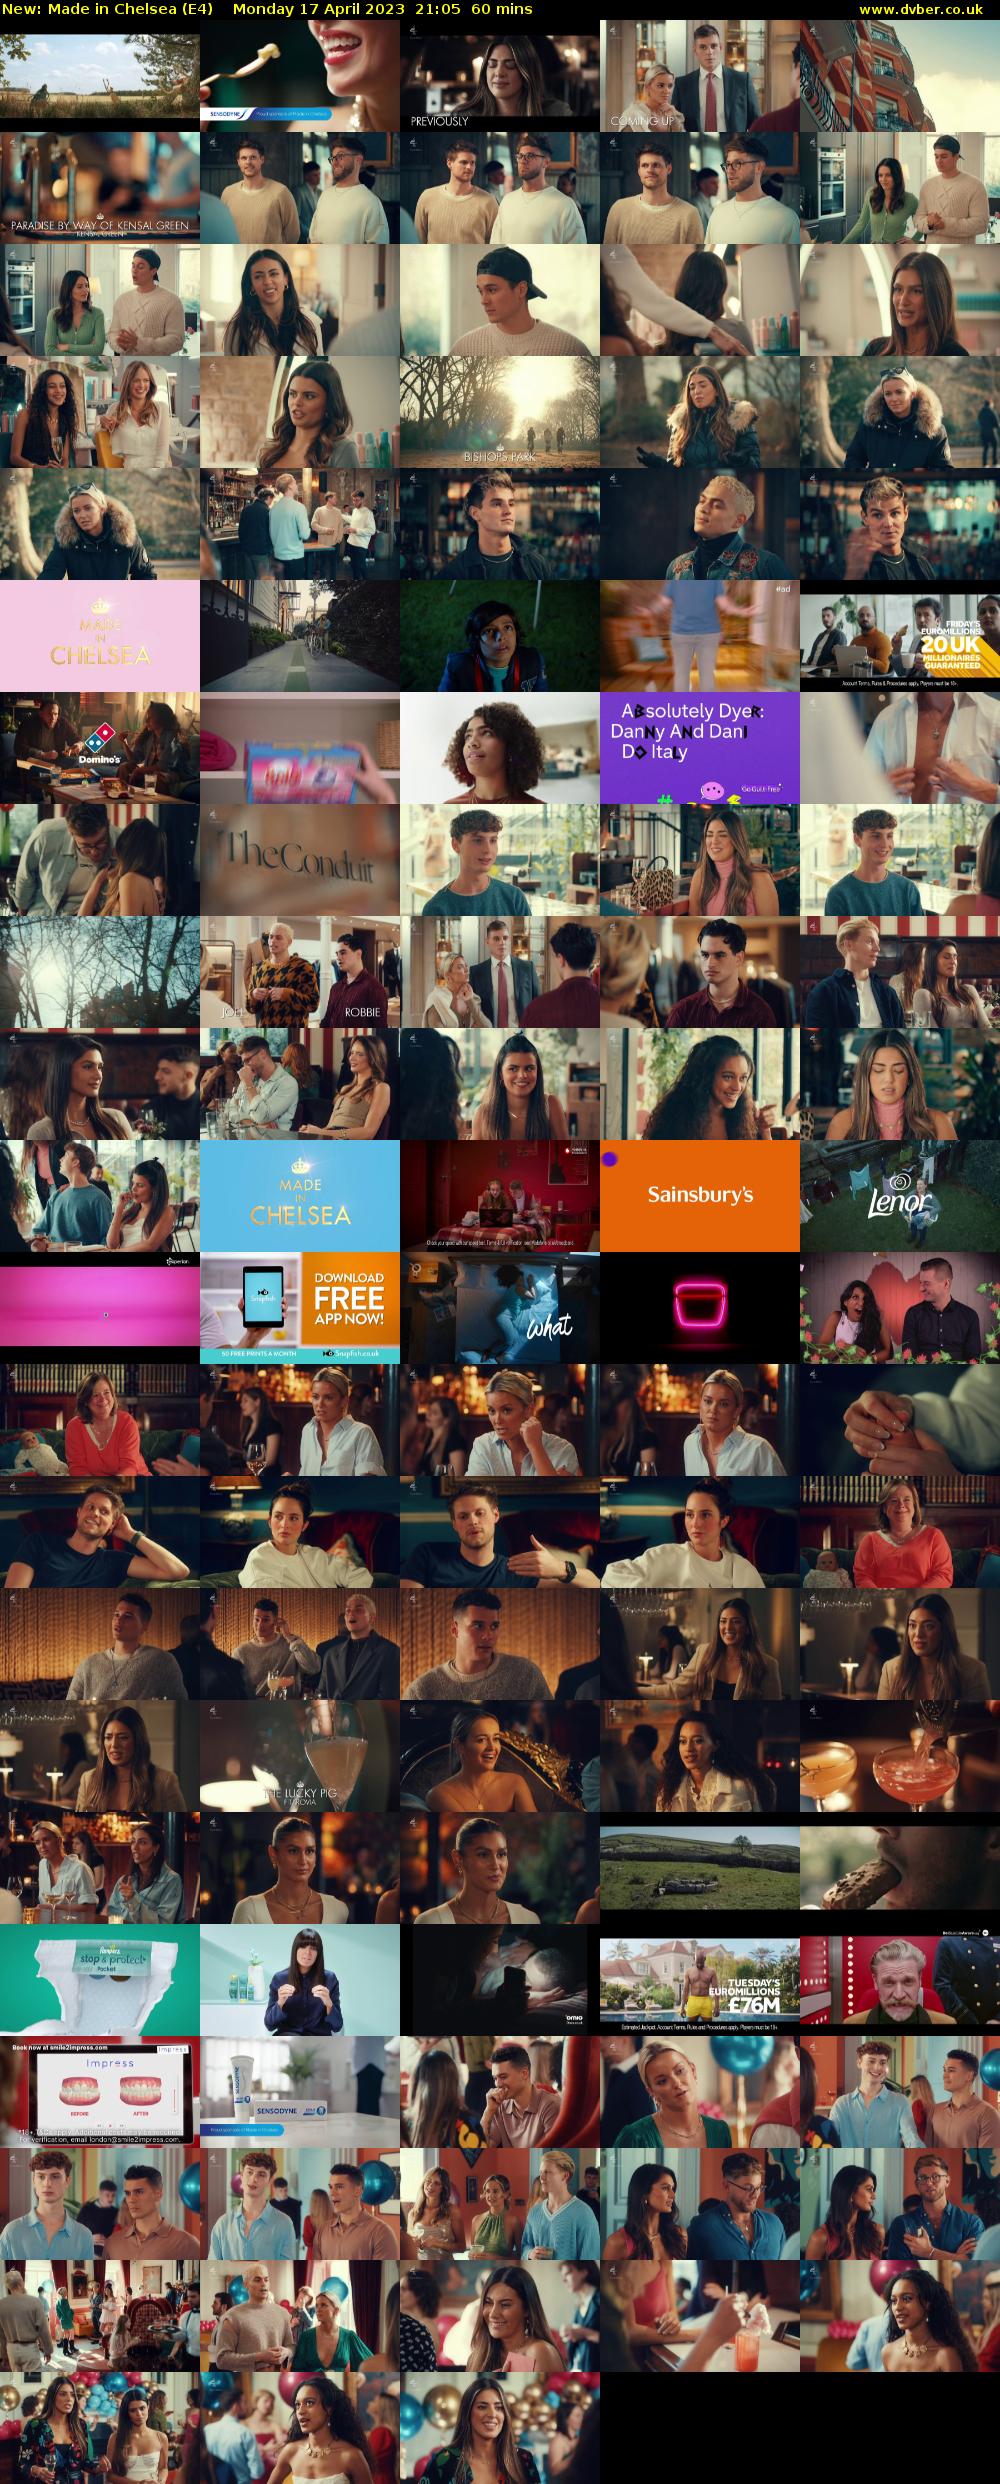 Made in Chelsea (E4) Monday 17 April 2023 21:05 - 22:05